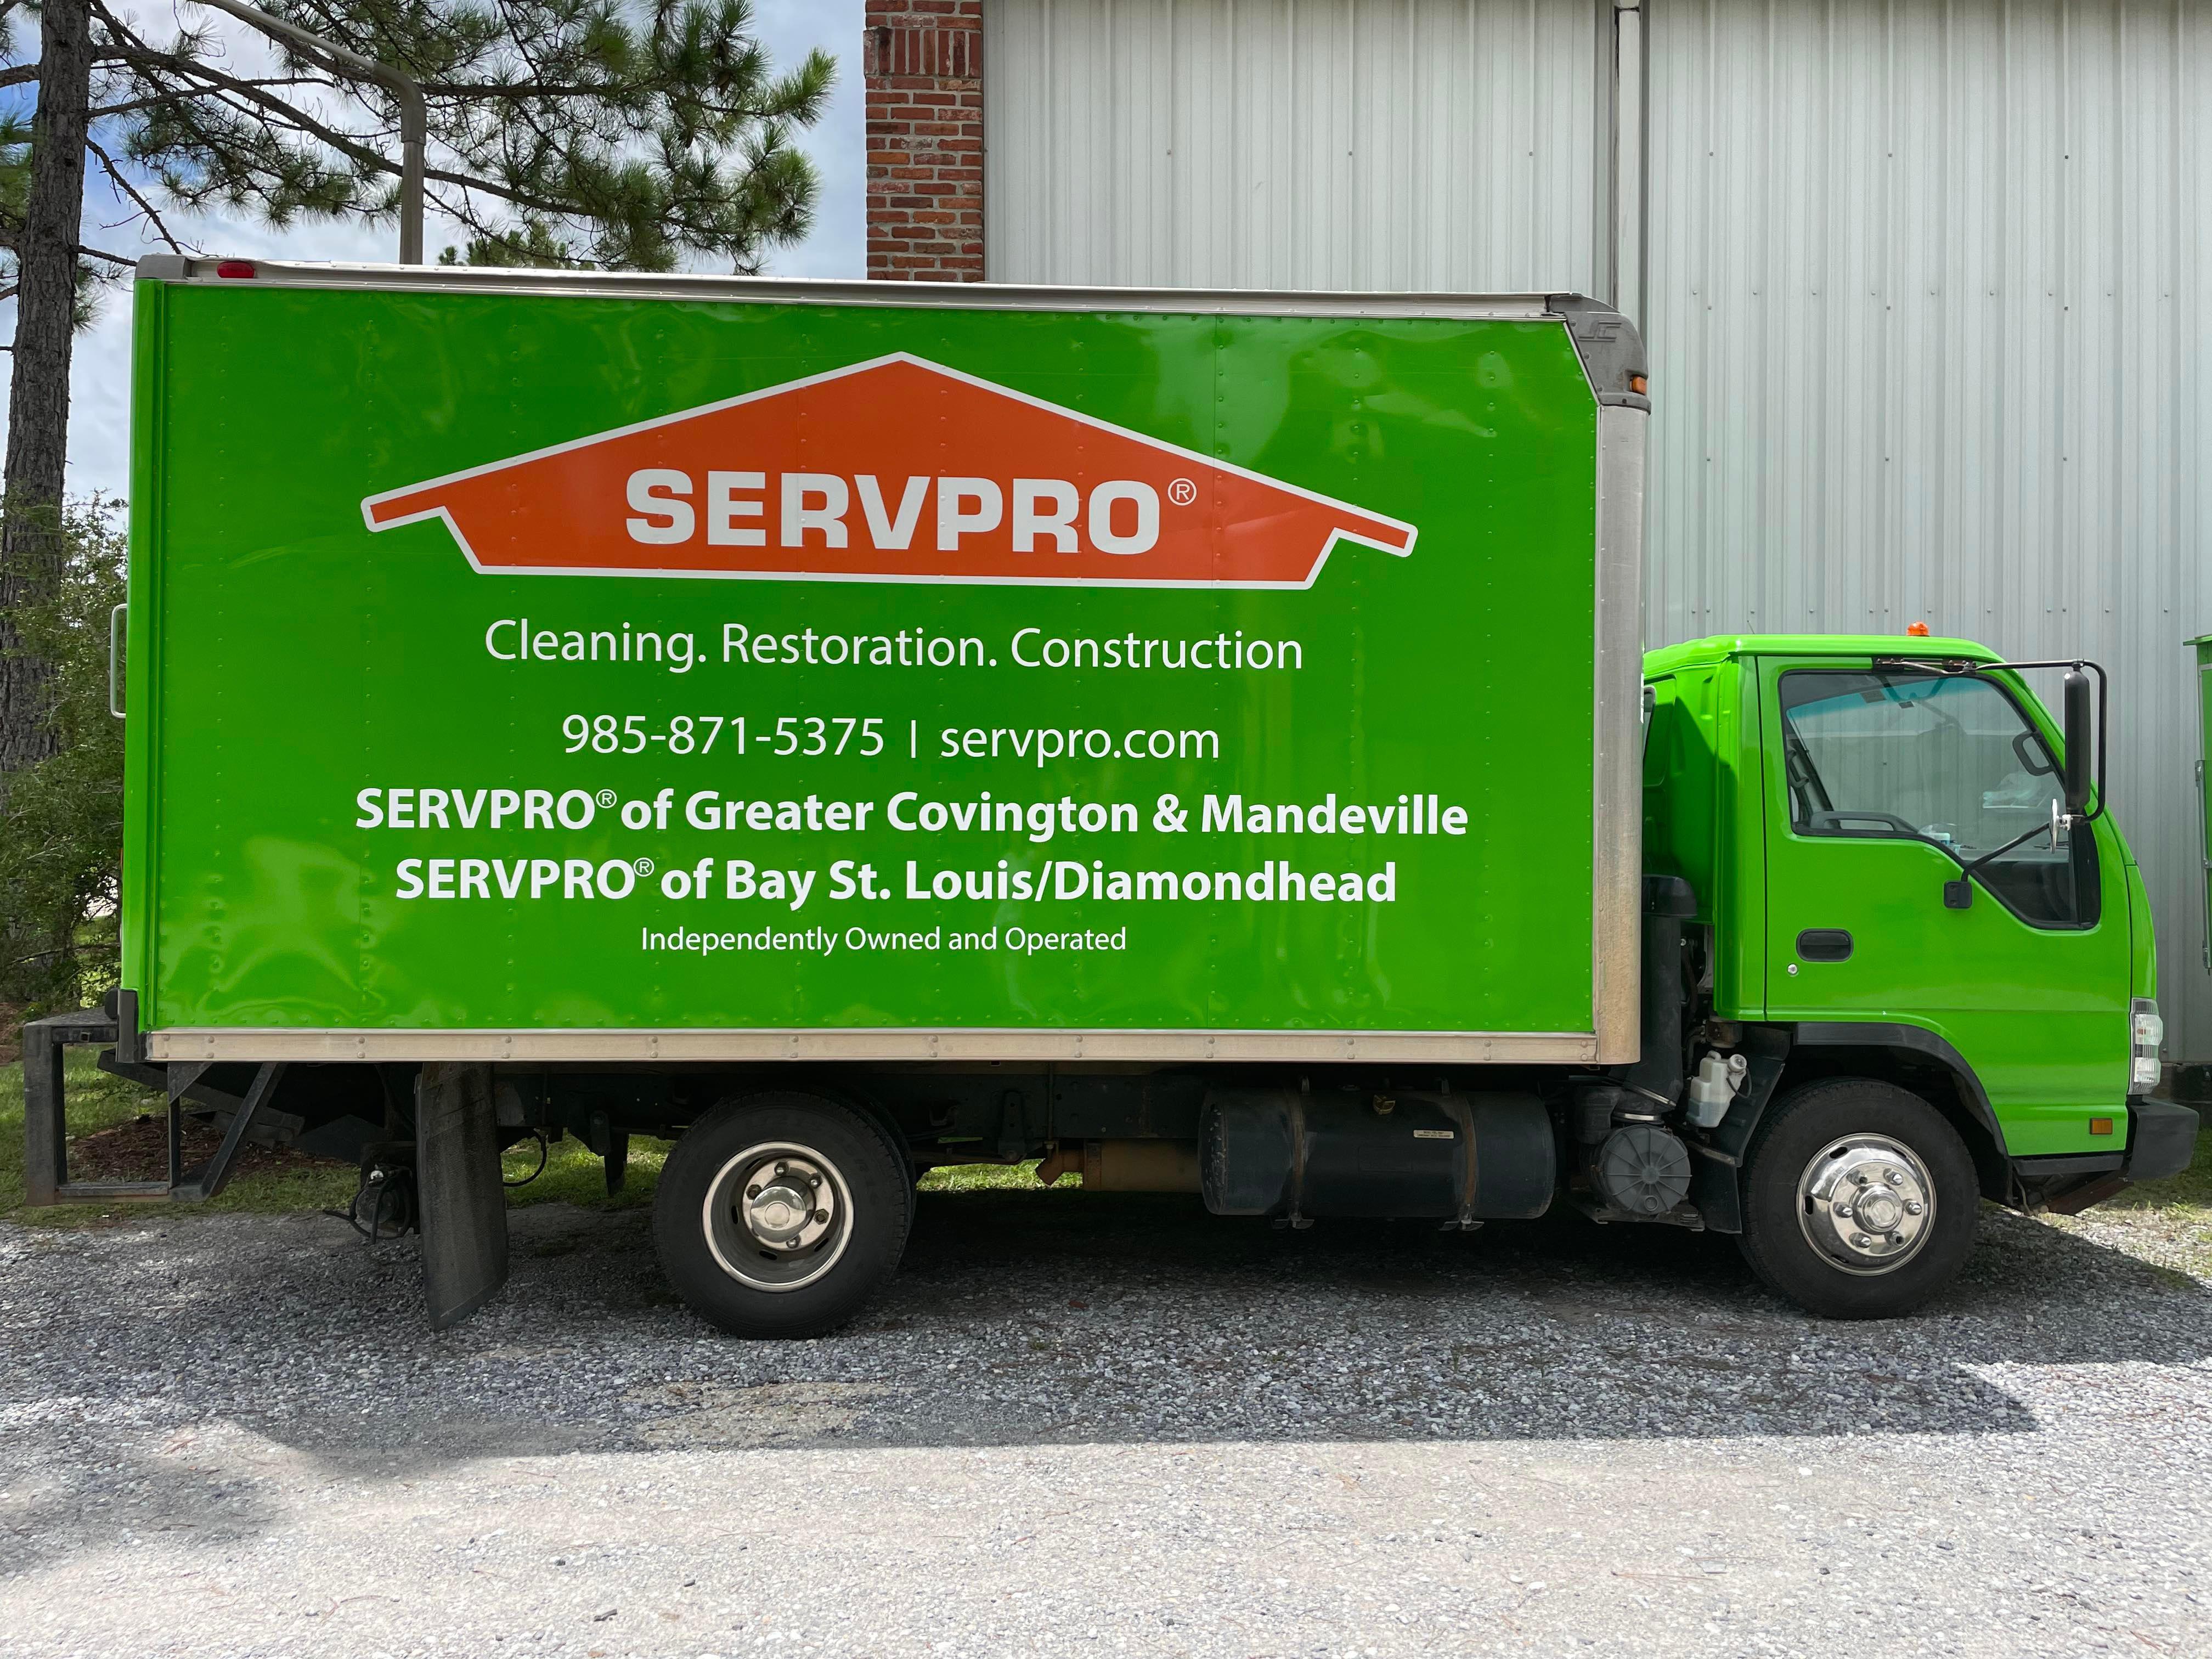 SERVPRO of Greater Covington and Mandeville green water damage mitigation vehicle.